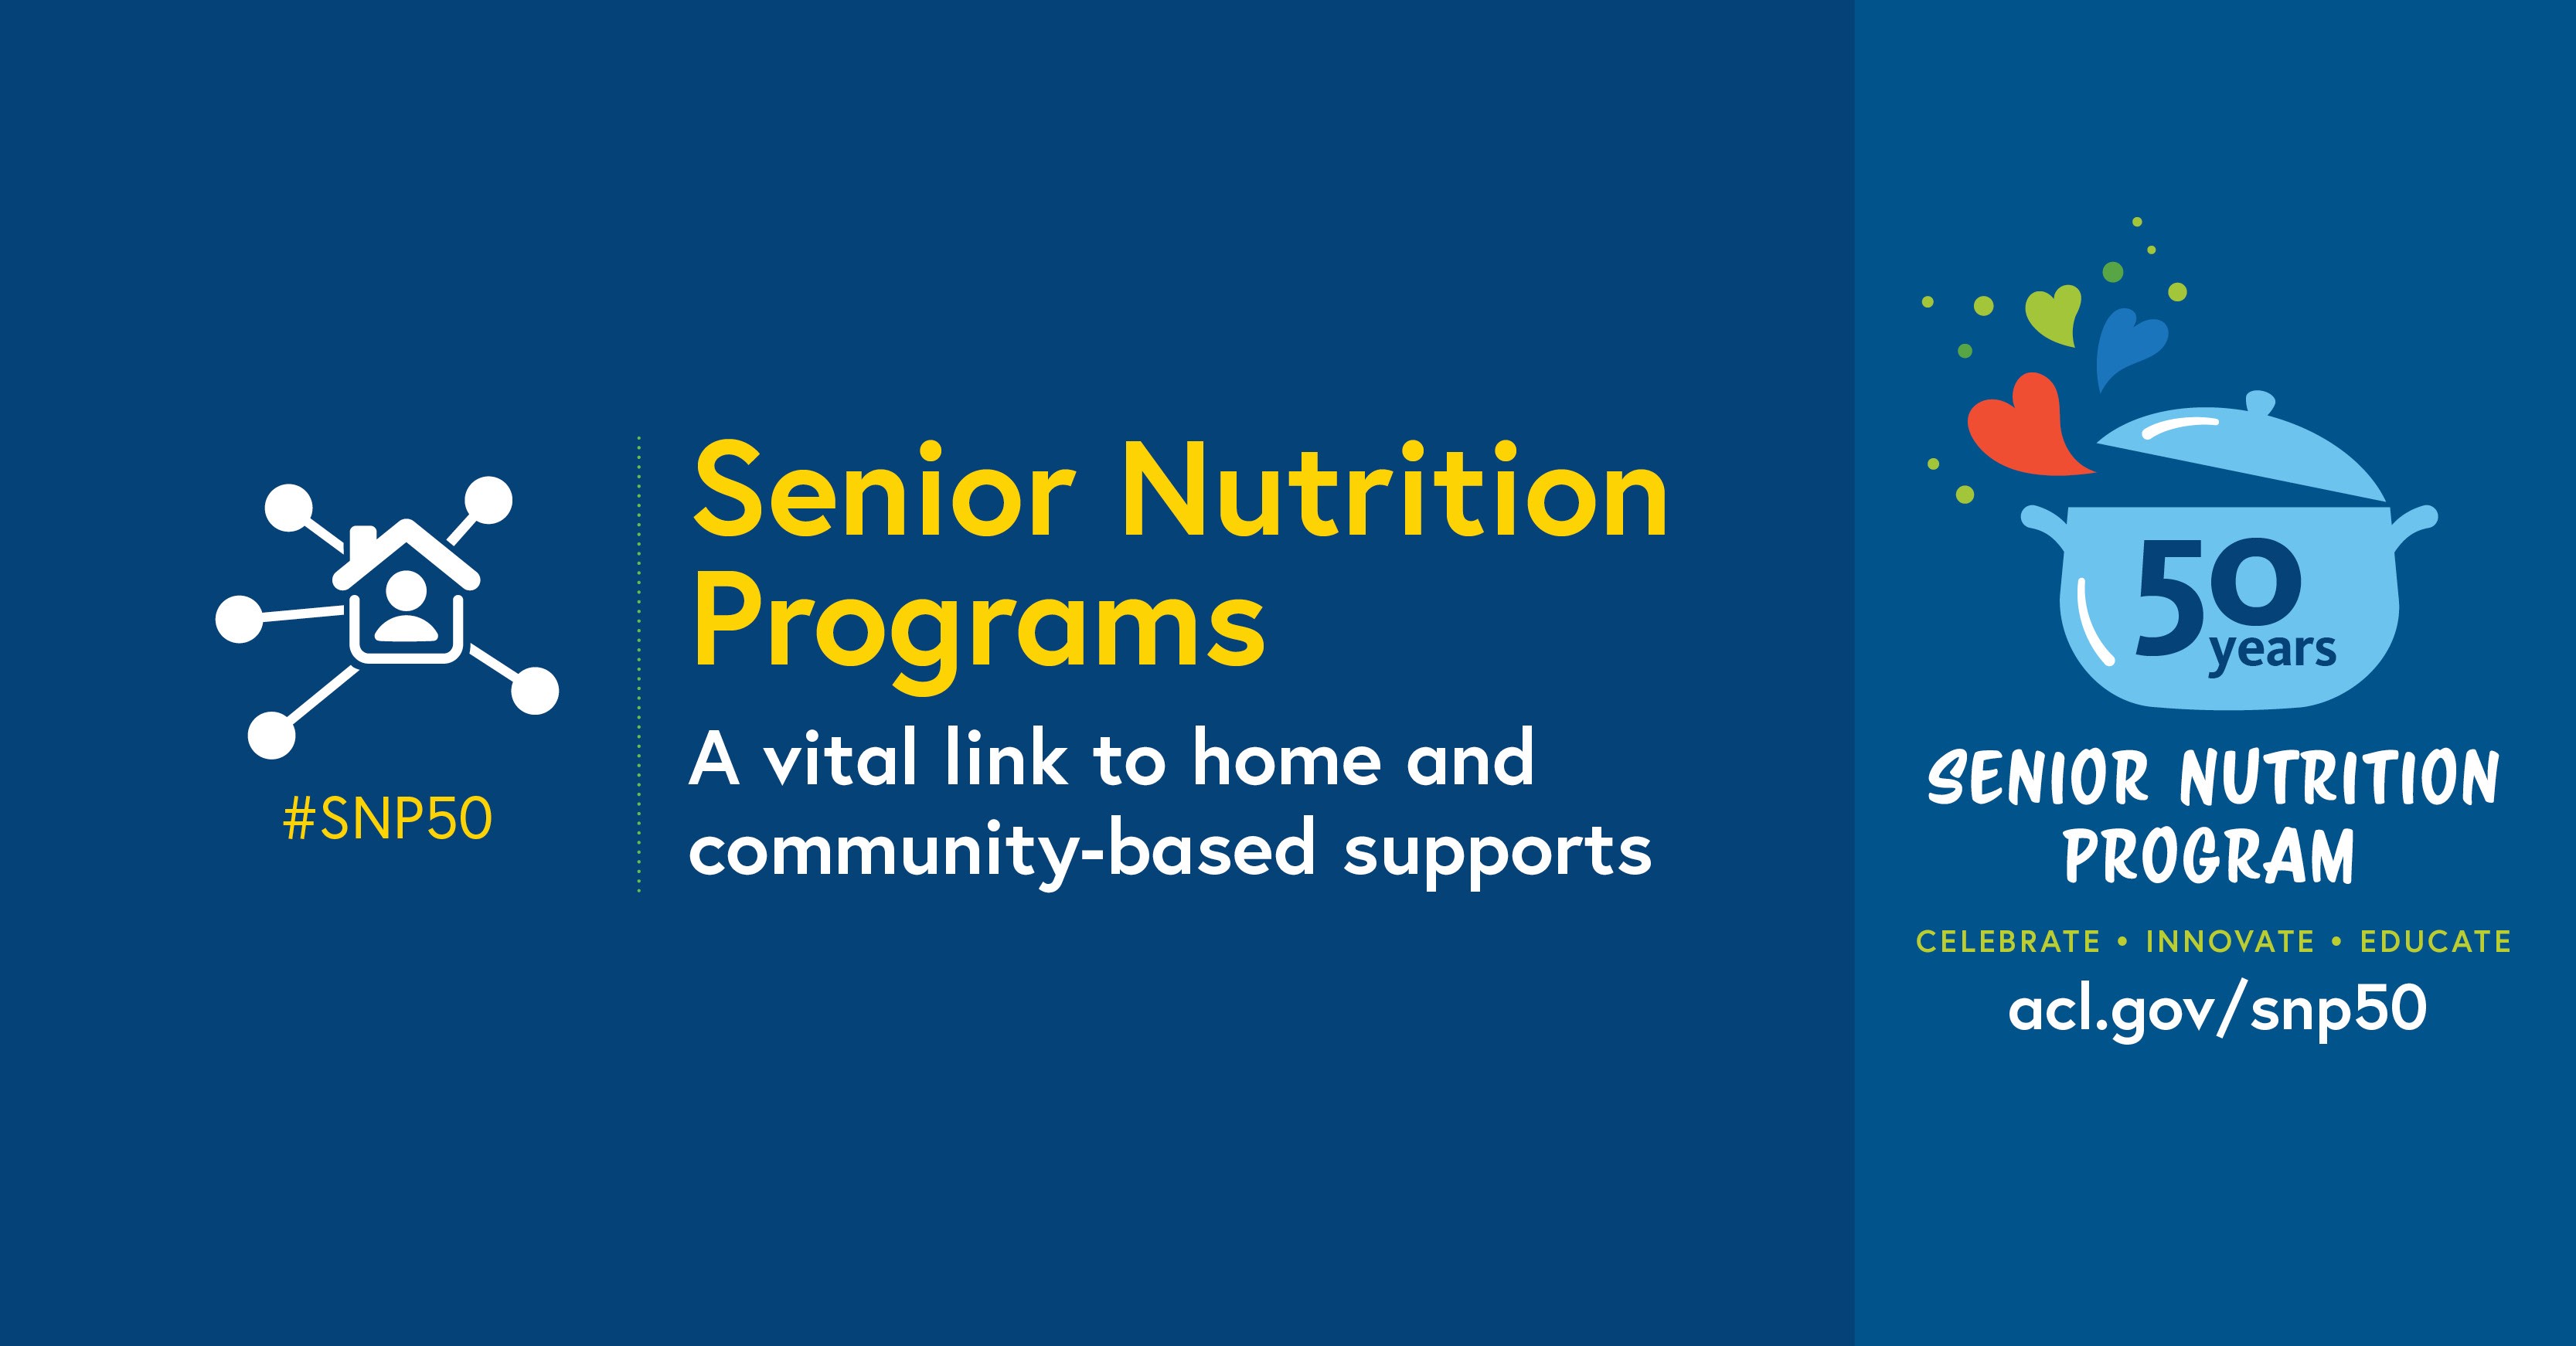 Social Media Graphic: Senior Nutrition Programs-a vital link to home and community-based supports. Senior Nutrition Program. Celebrate. Innovate. Educate. acl.gov/snp50 #snp50 